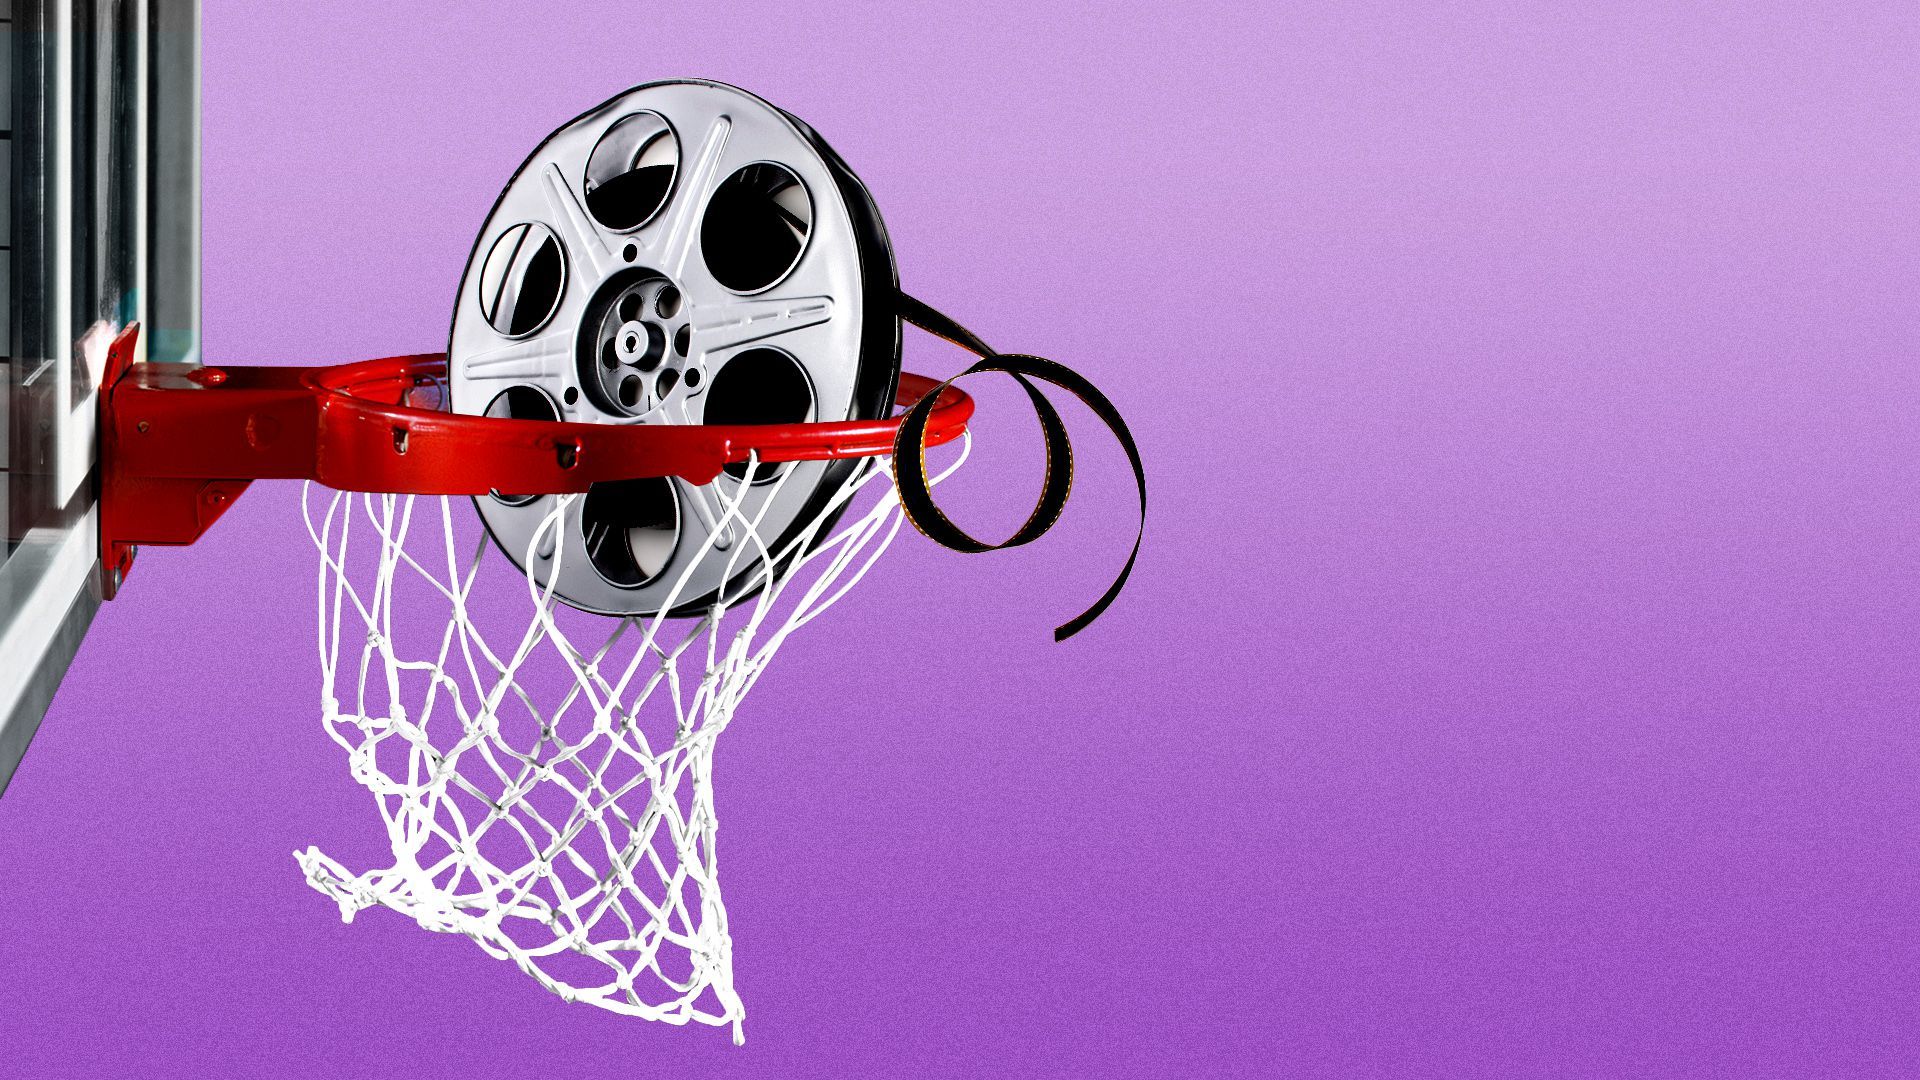 Illustration of a film reel dunking into a basketball net